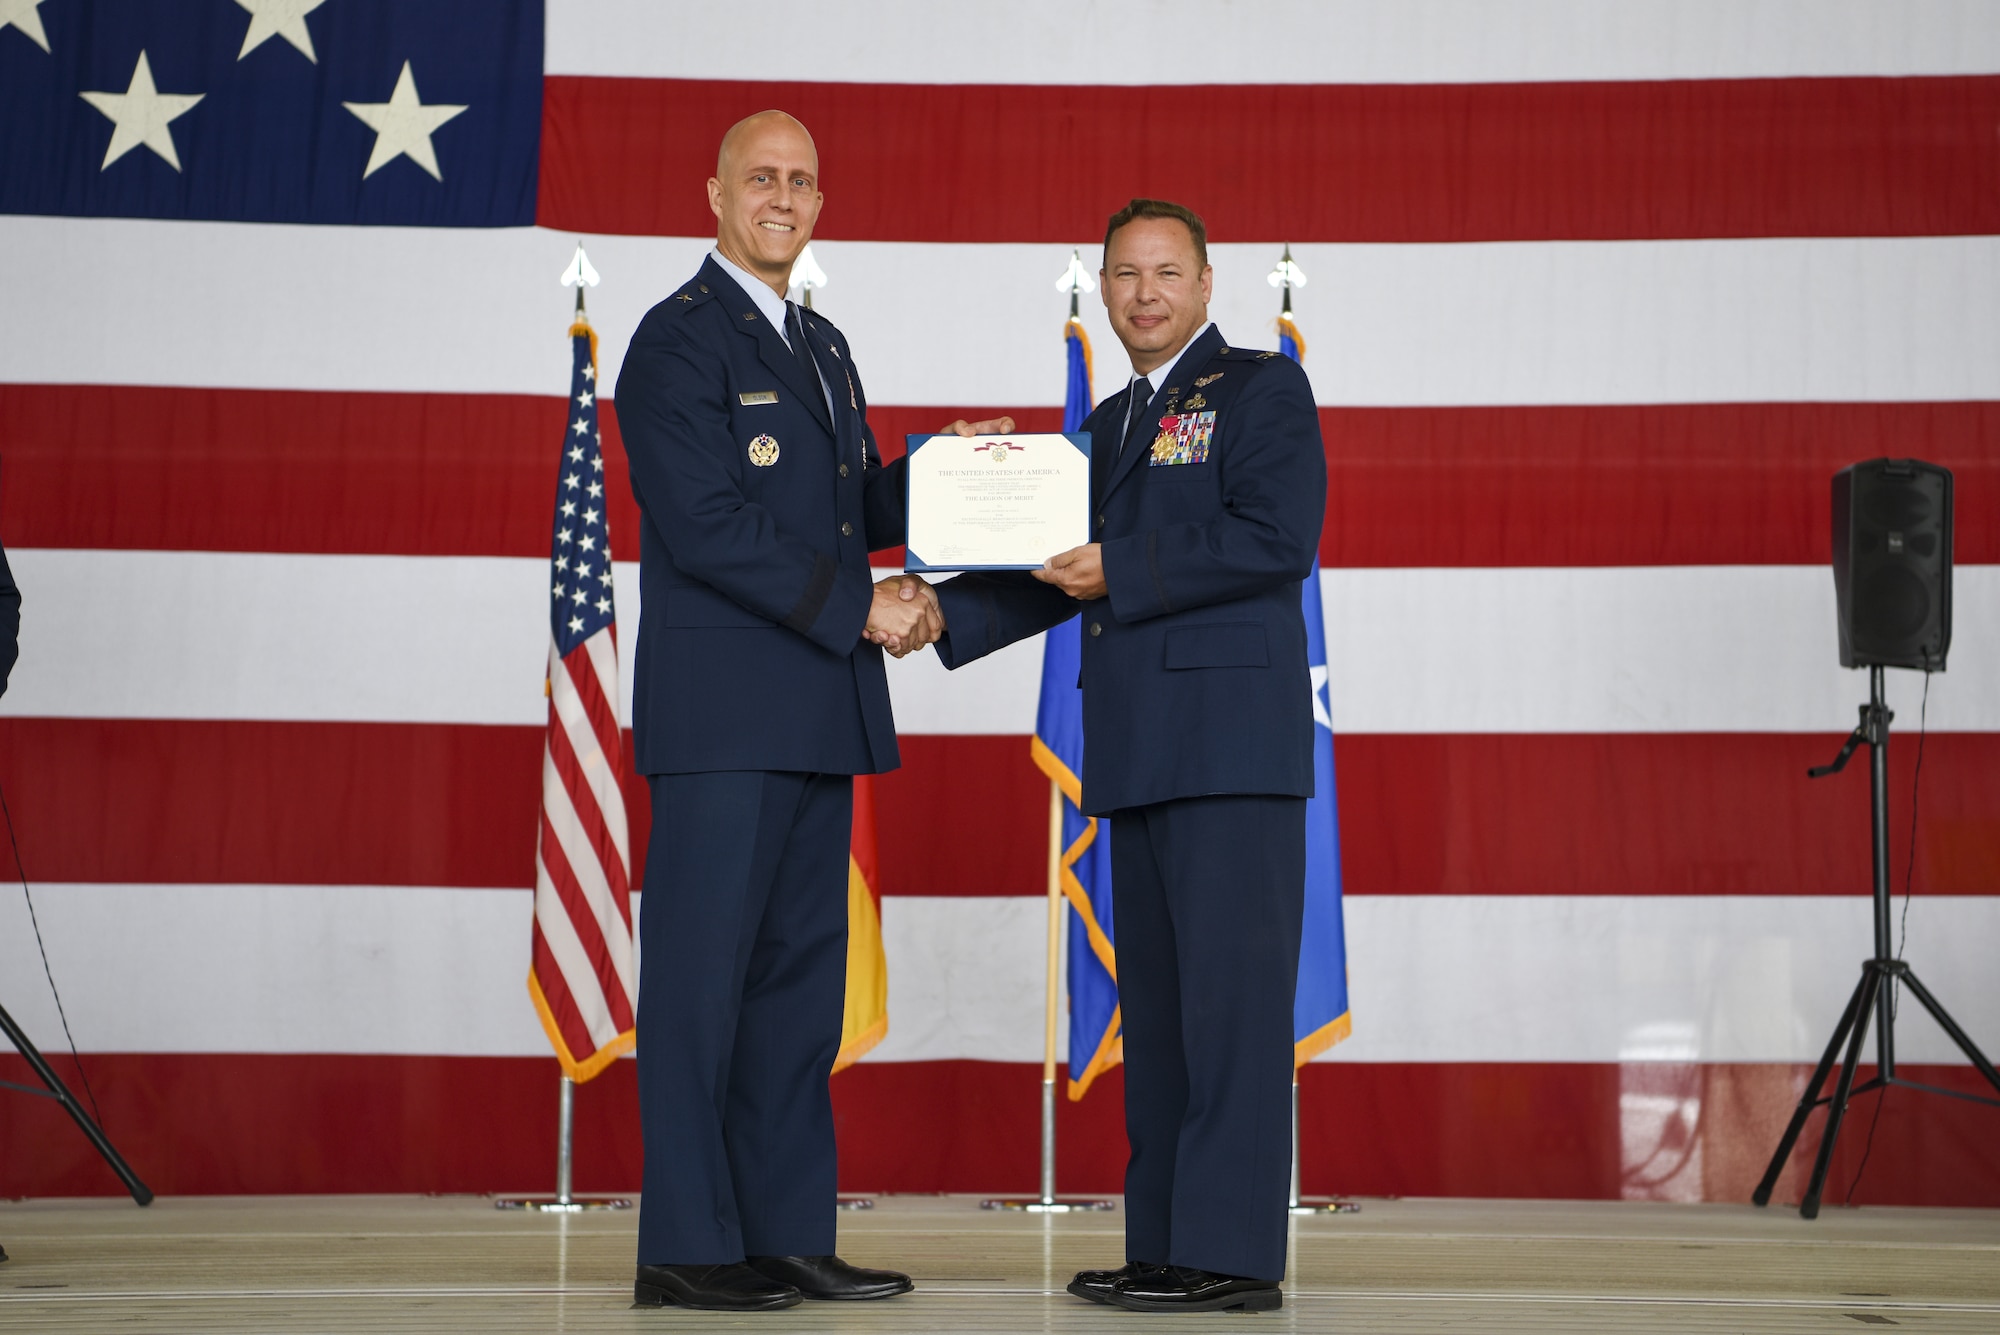 U.S. Air Force Brig. Gen. Josh Olson, 86th Airlift Wing commander, left, presents Col. Anthony M. Nance, 86th Maintenance Group outgoing commander, with a Legion of Merit certificate during the 86 CEG change of command ceremony at Ramstein Air Base, Germany, July 13, 2022.